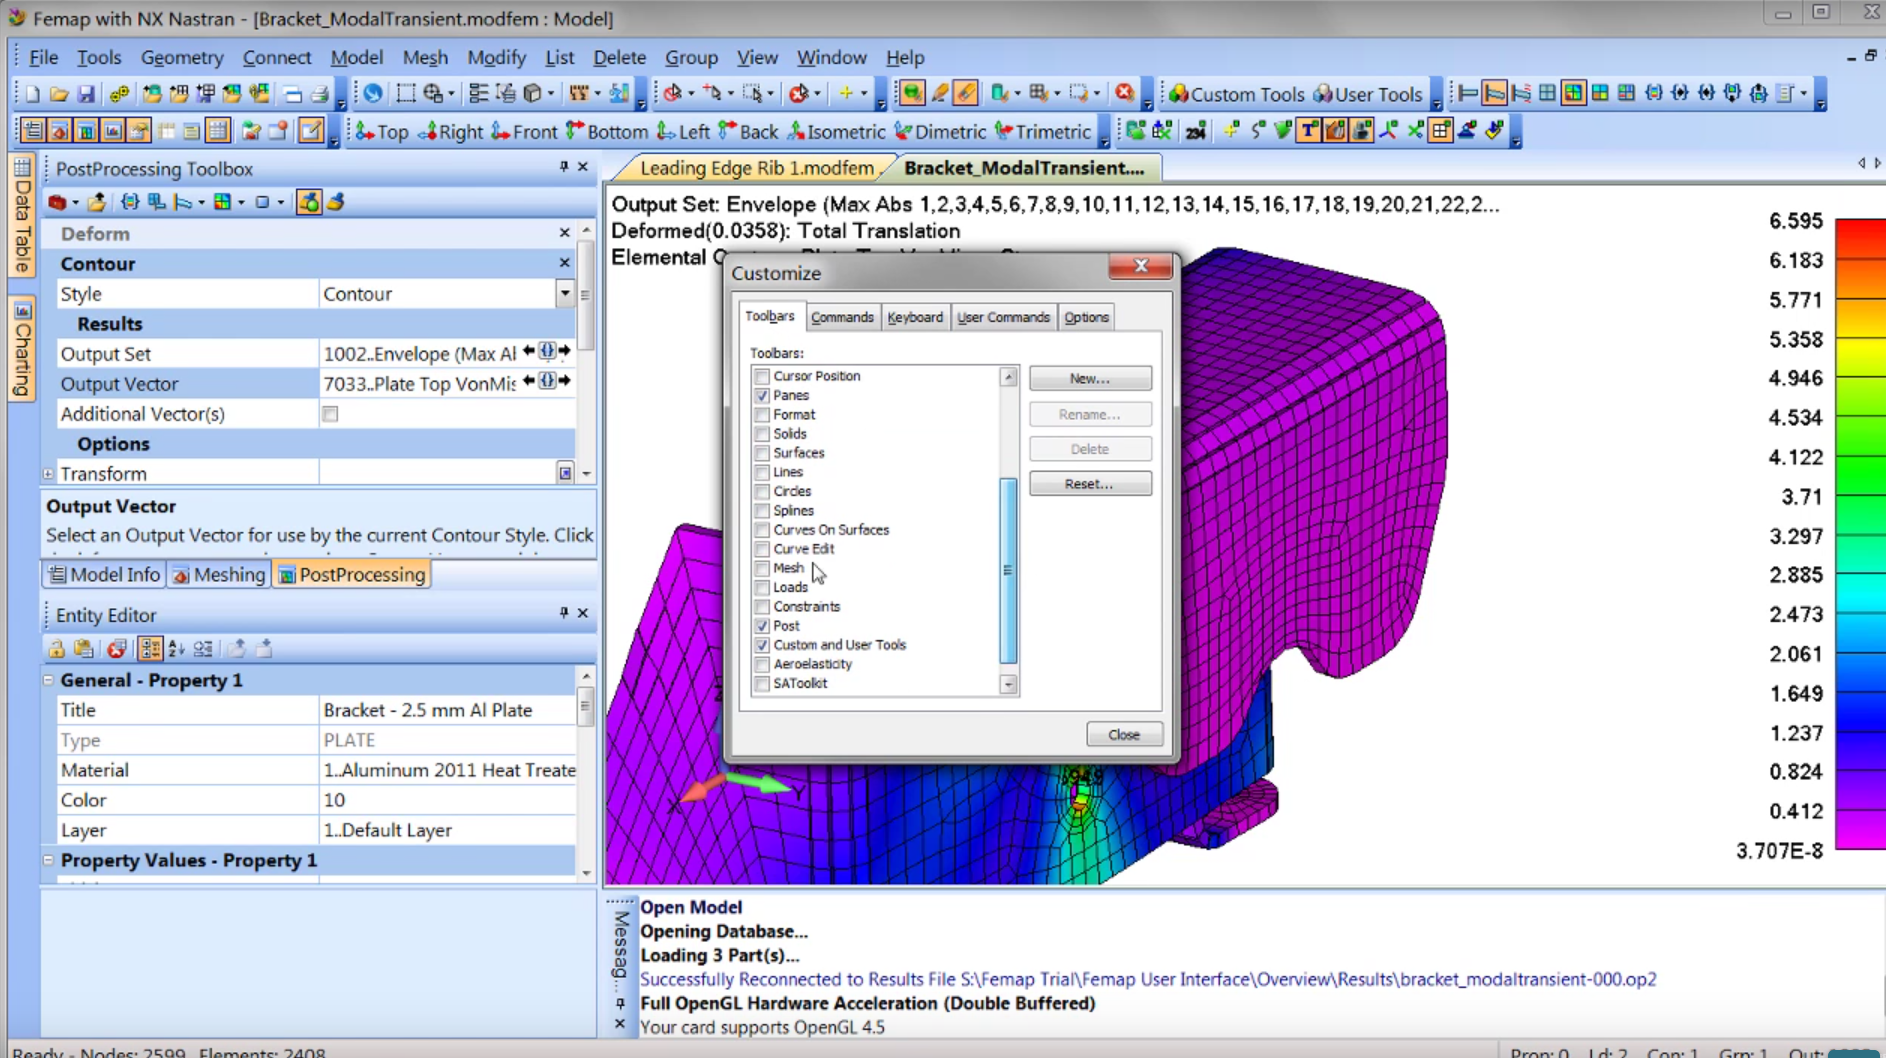 Femap Graphical User Interface (GUI) appears when you launch Femap